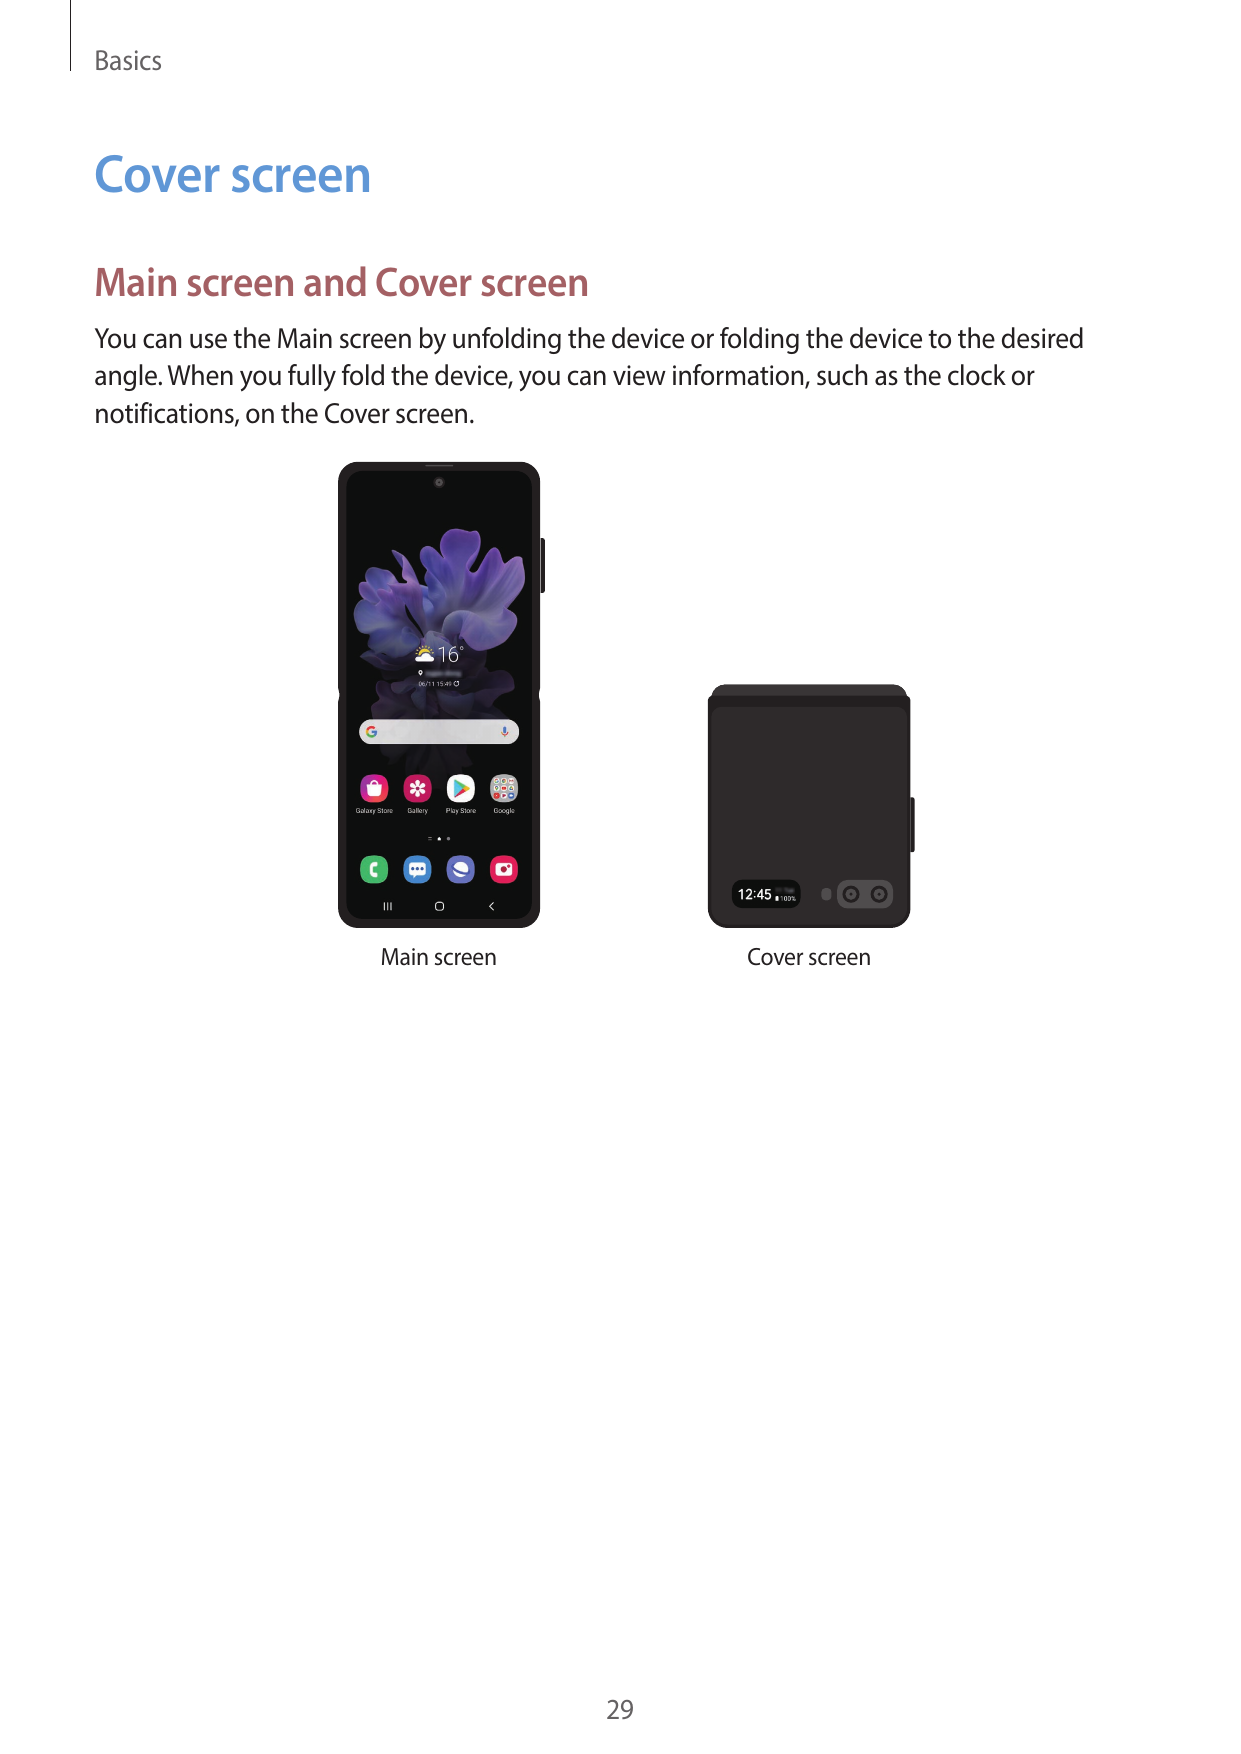 BasicsCover screenMain screen and Cover screenYou can use the Main screen by unfolding the device or folding the device to the d